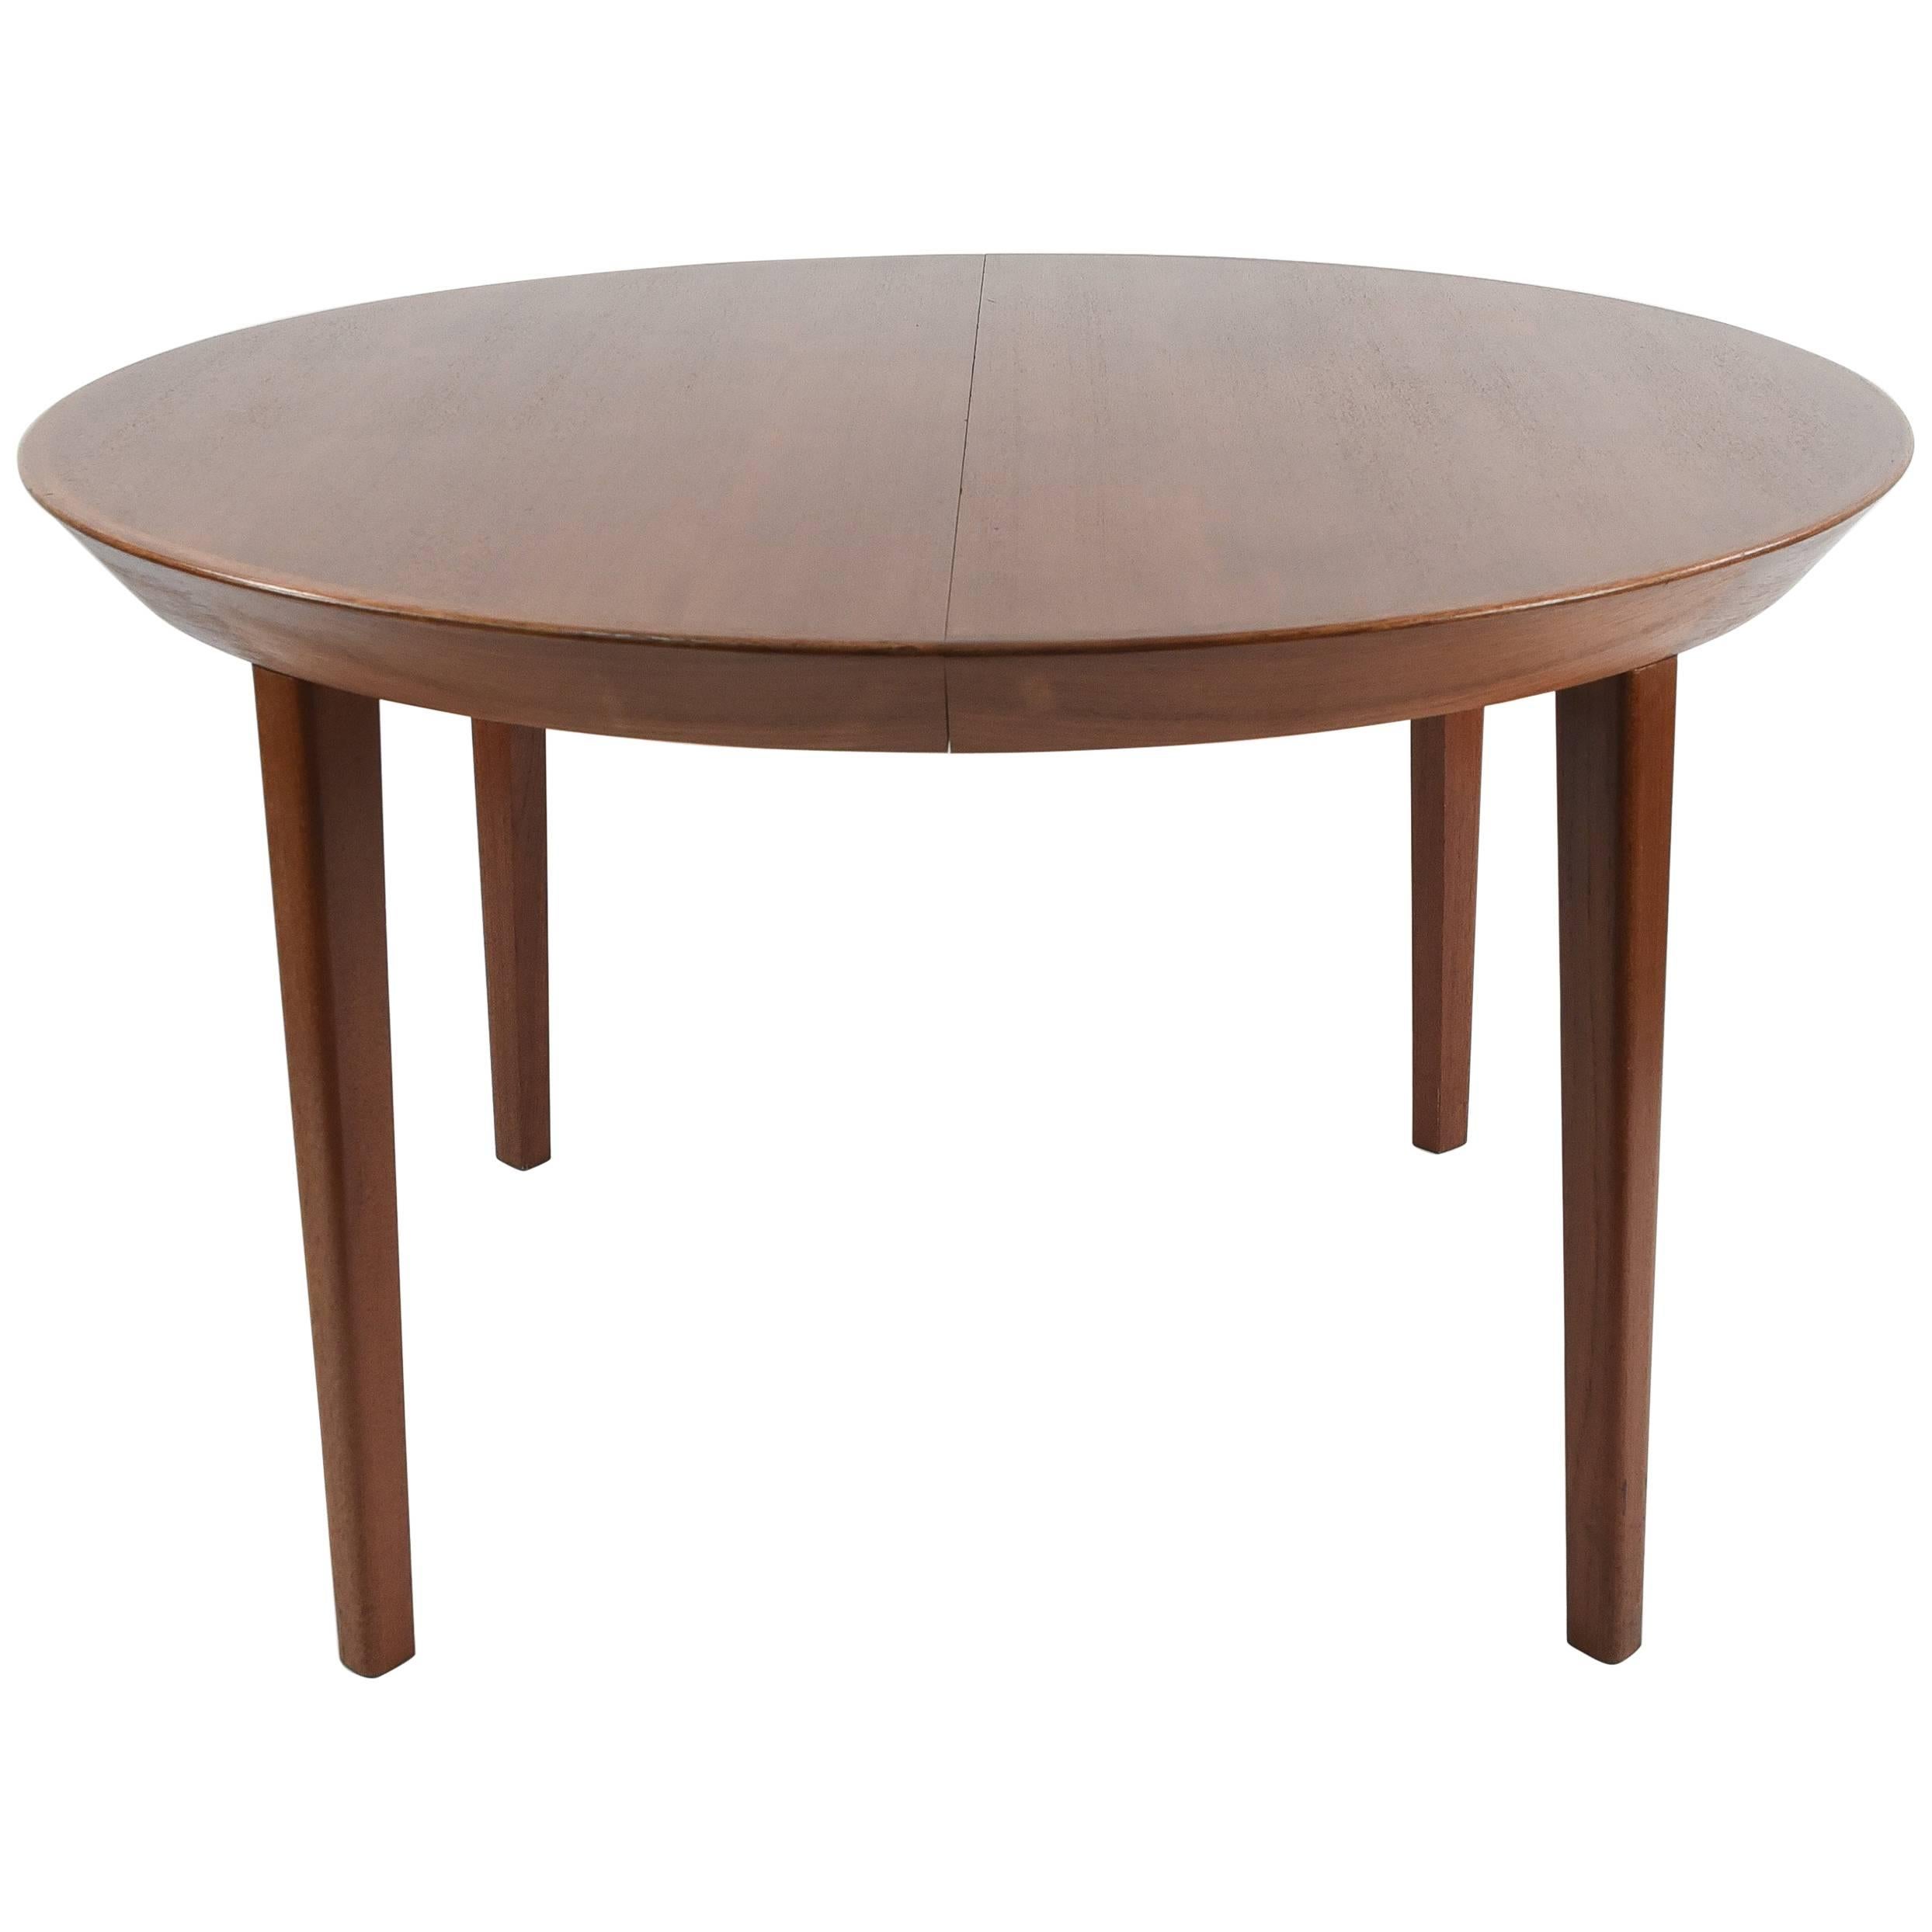 Round Midcentury Dining Table in Teak by Ole Hald for Gudme Møbelfabrik